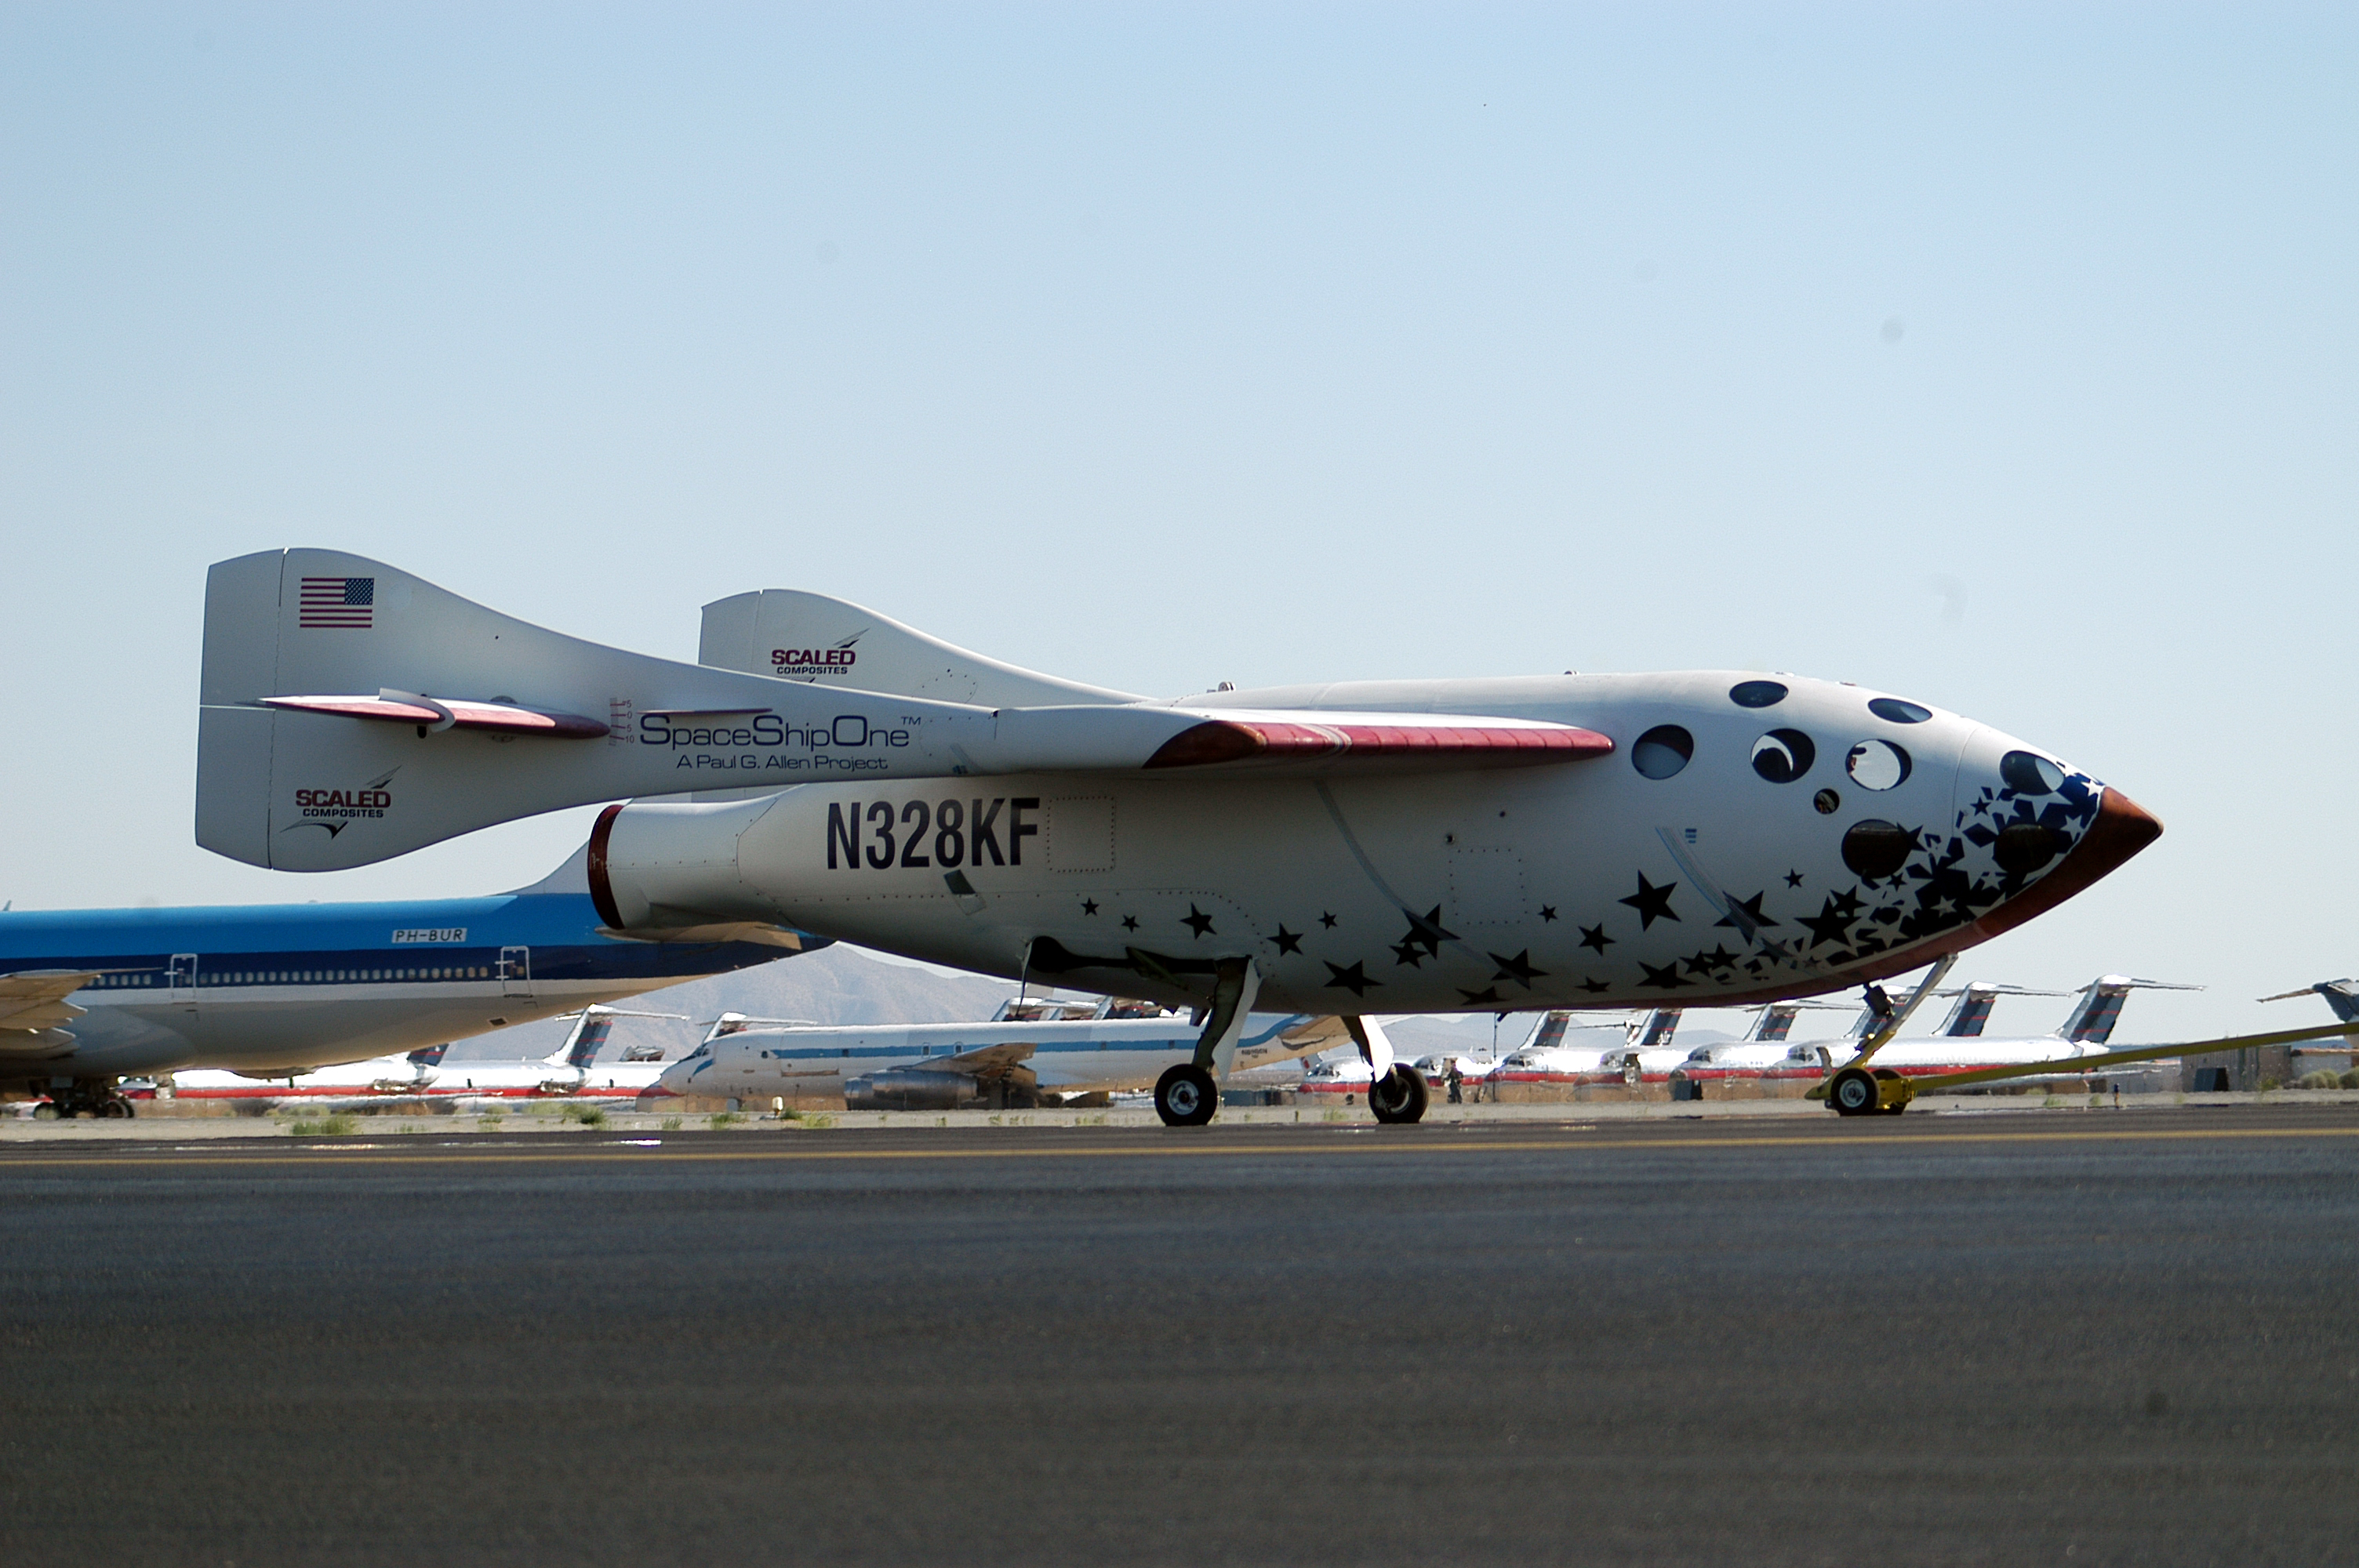 SpaceShipOne was Earth's first privately funded manned spacecraft.